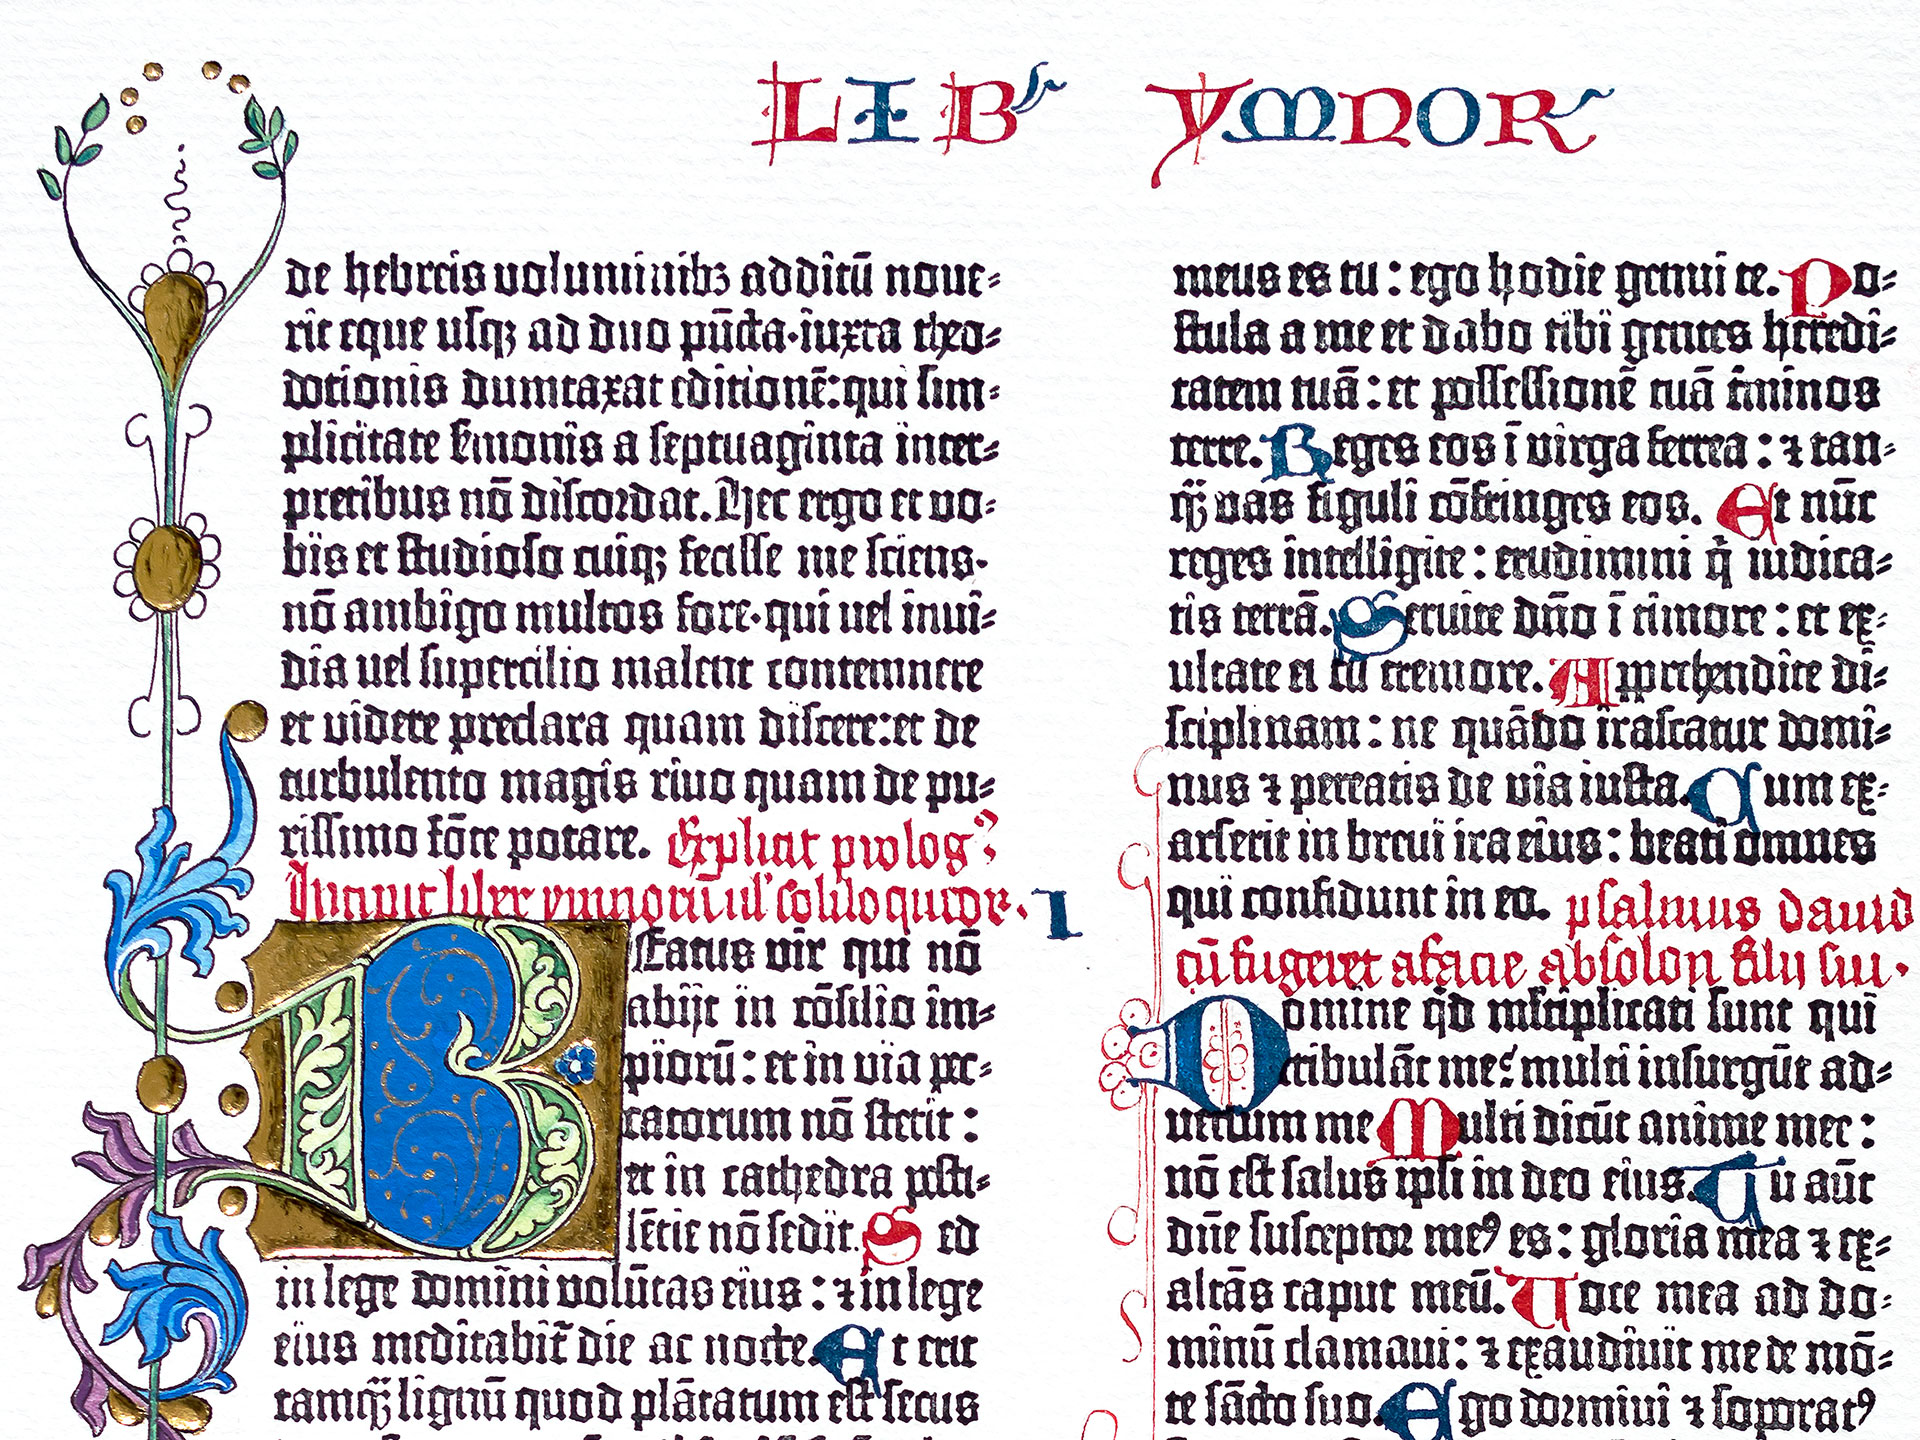 Psalm 1. Ornamental page from the Gutenberg Bible (Variation)